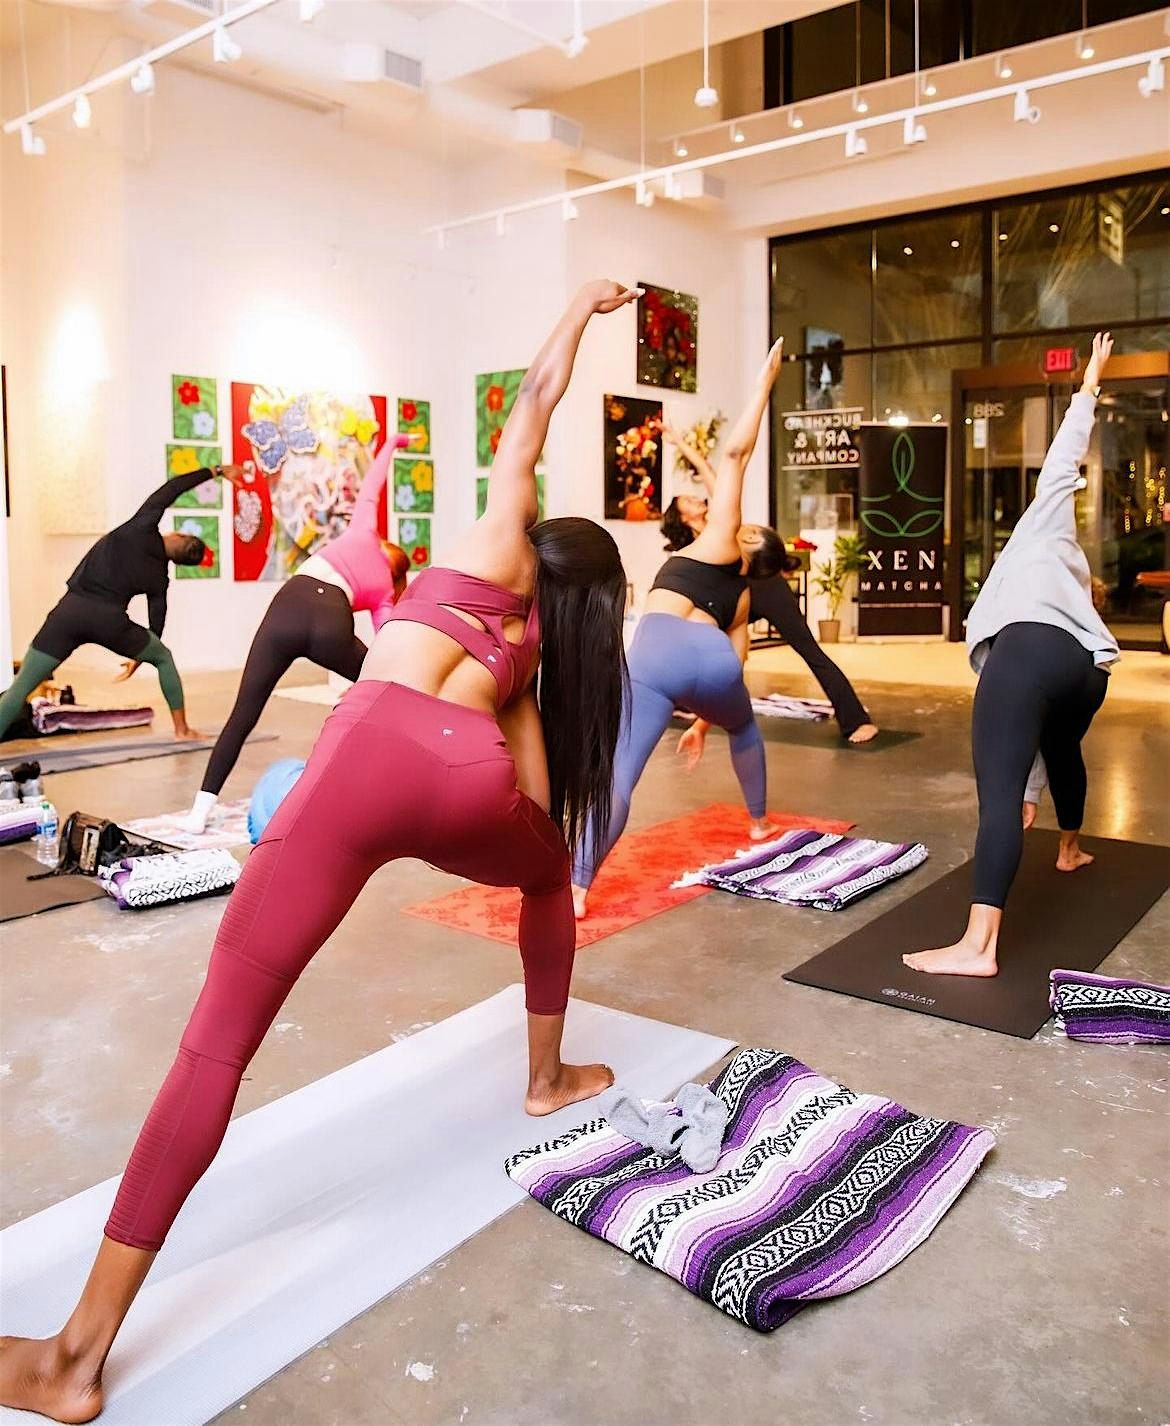 \u201cART THERAPY\u201d Yoga with Serenity Sessions in Buckhead Art Gallery